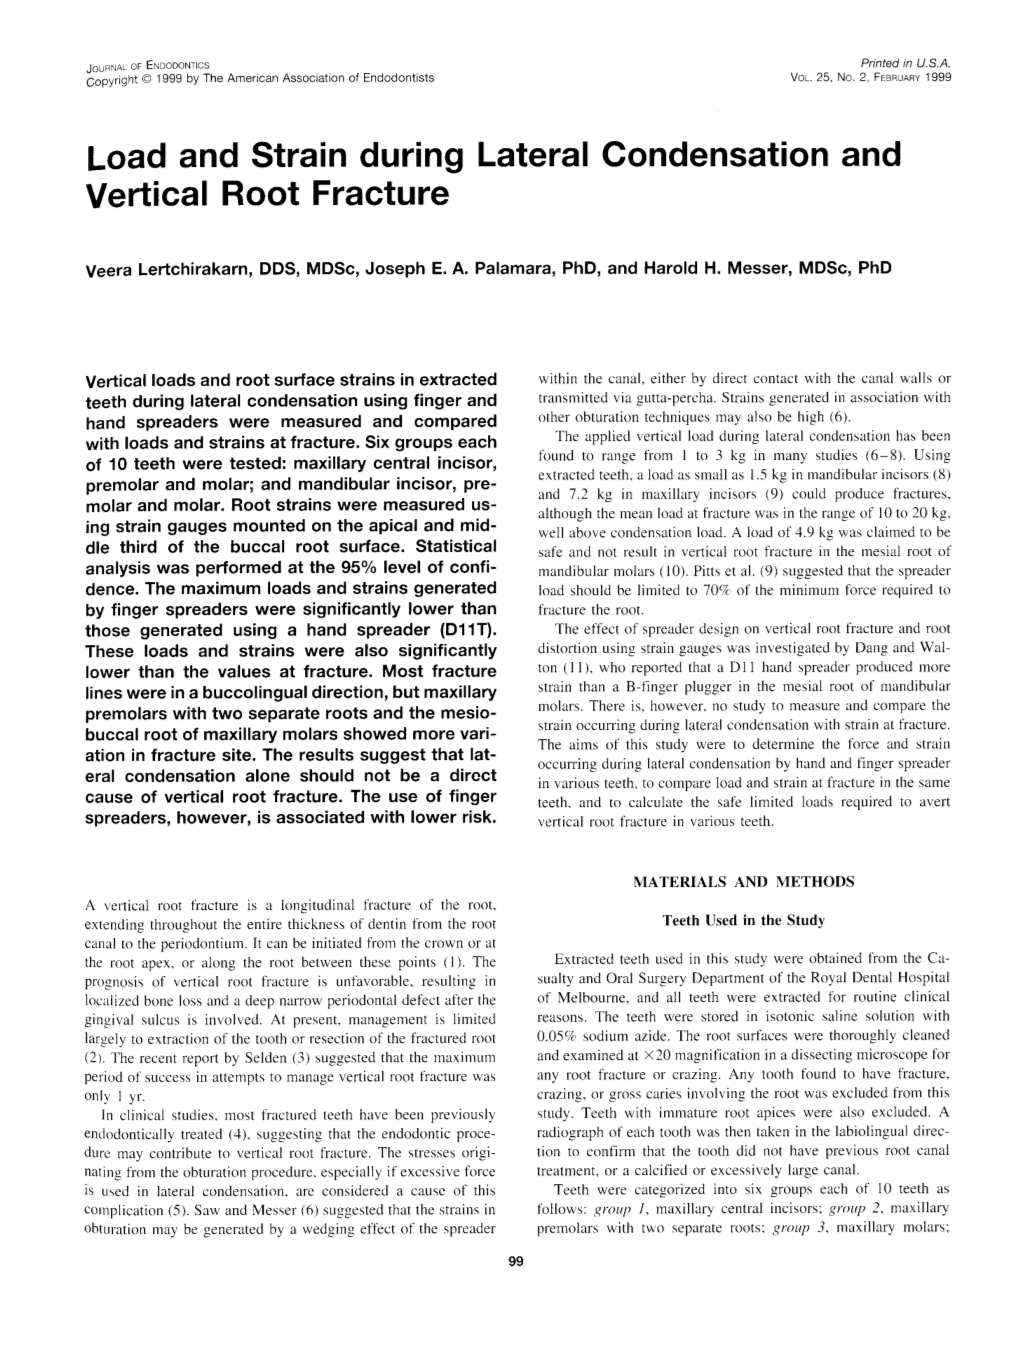 Load and Strain During Lateral Condensation and Vertical Root Fracture